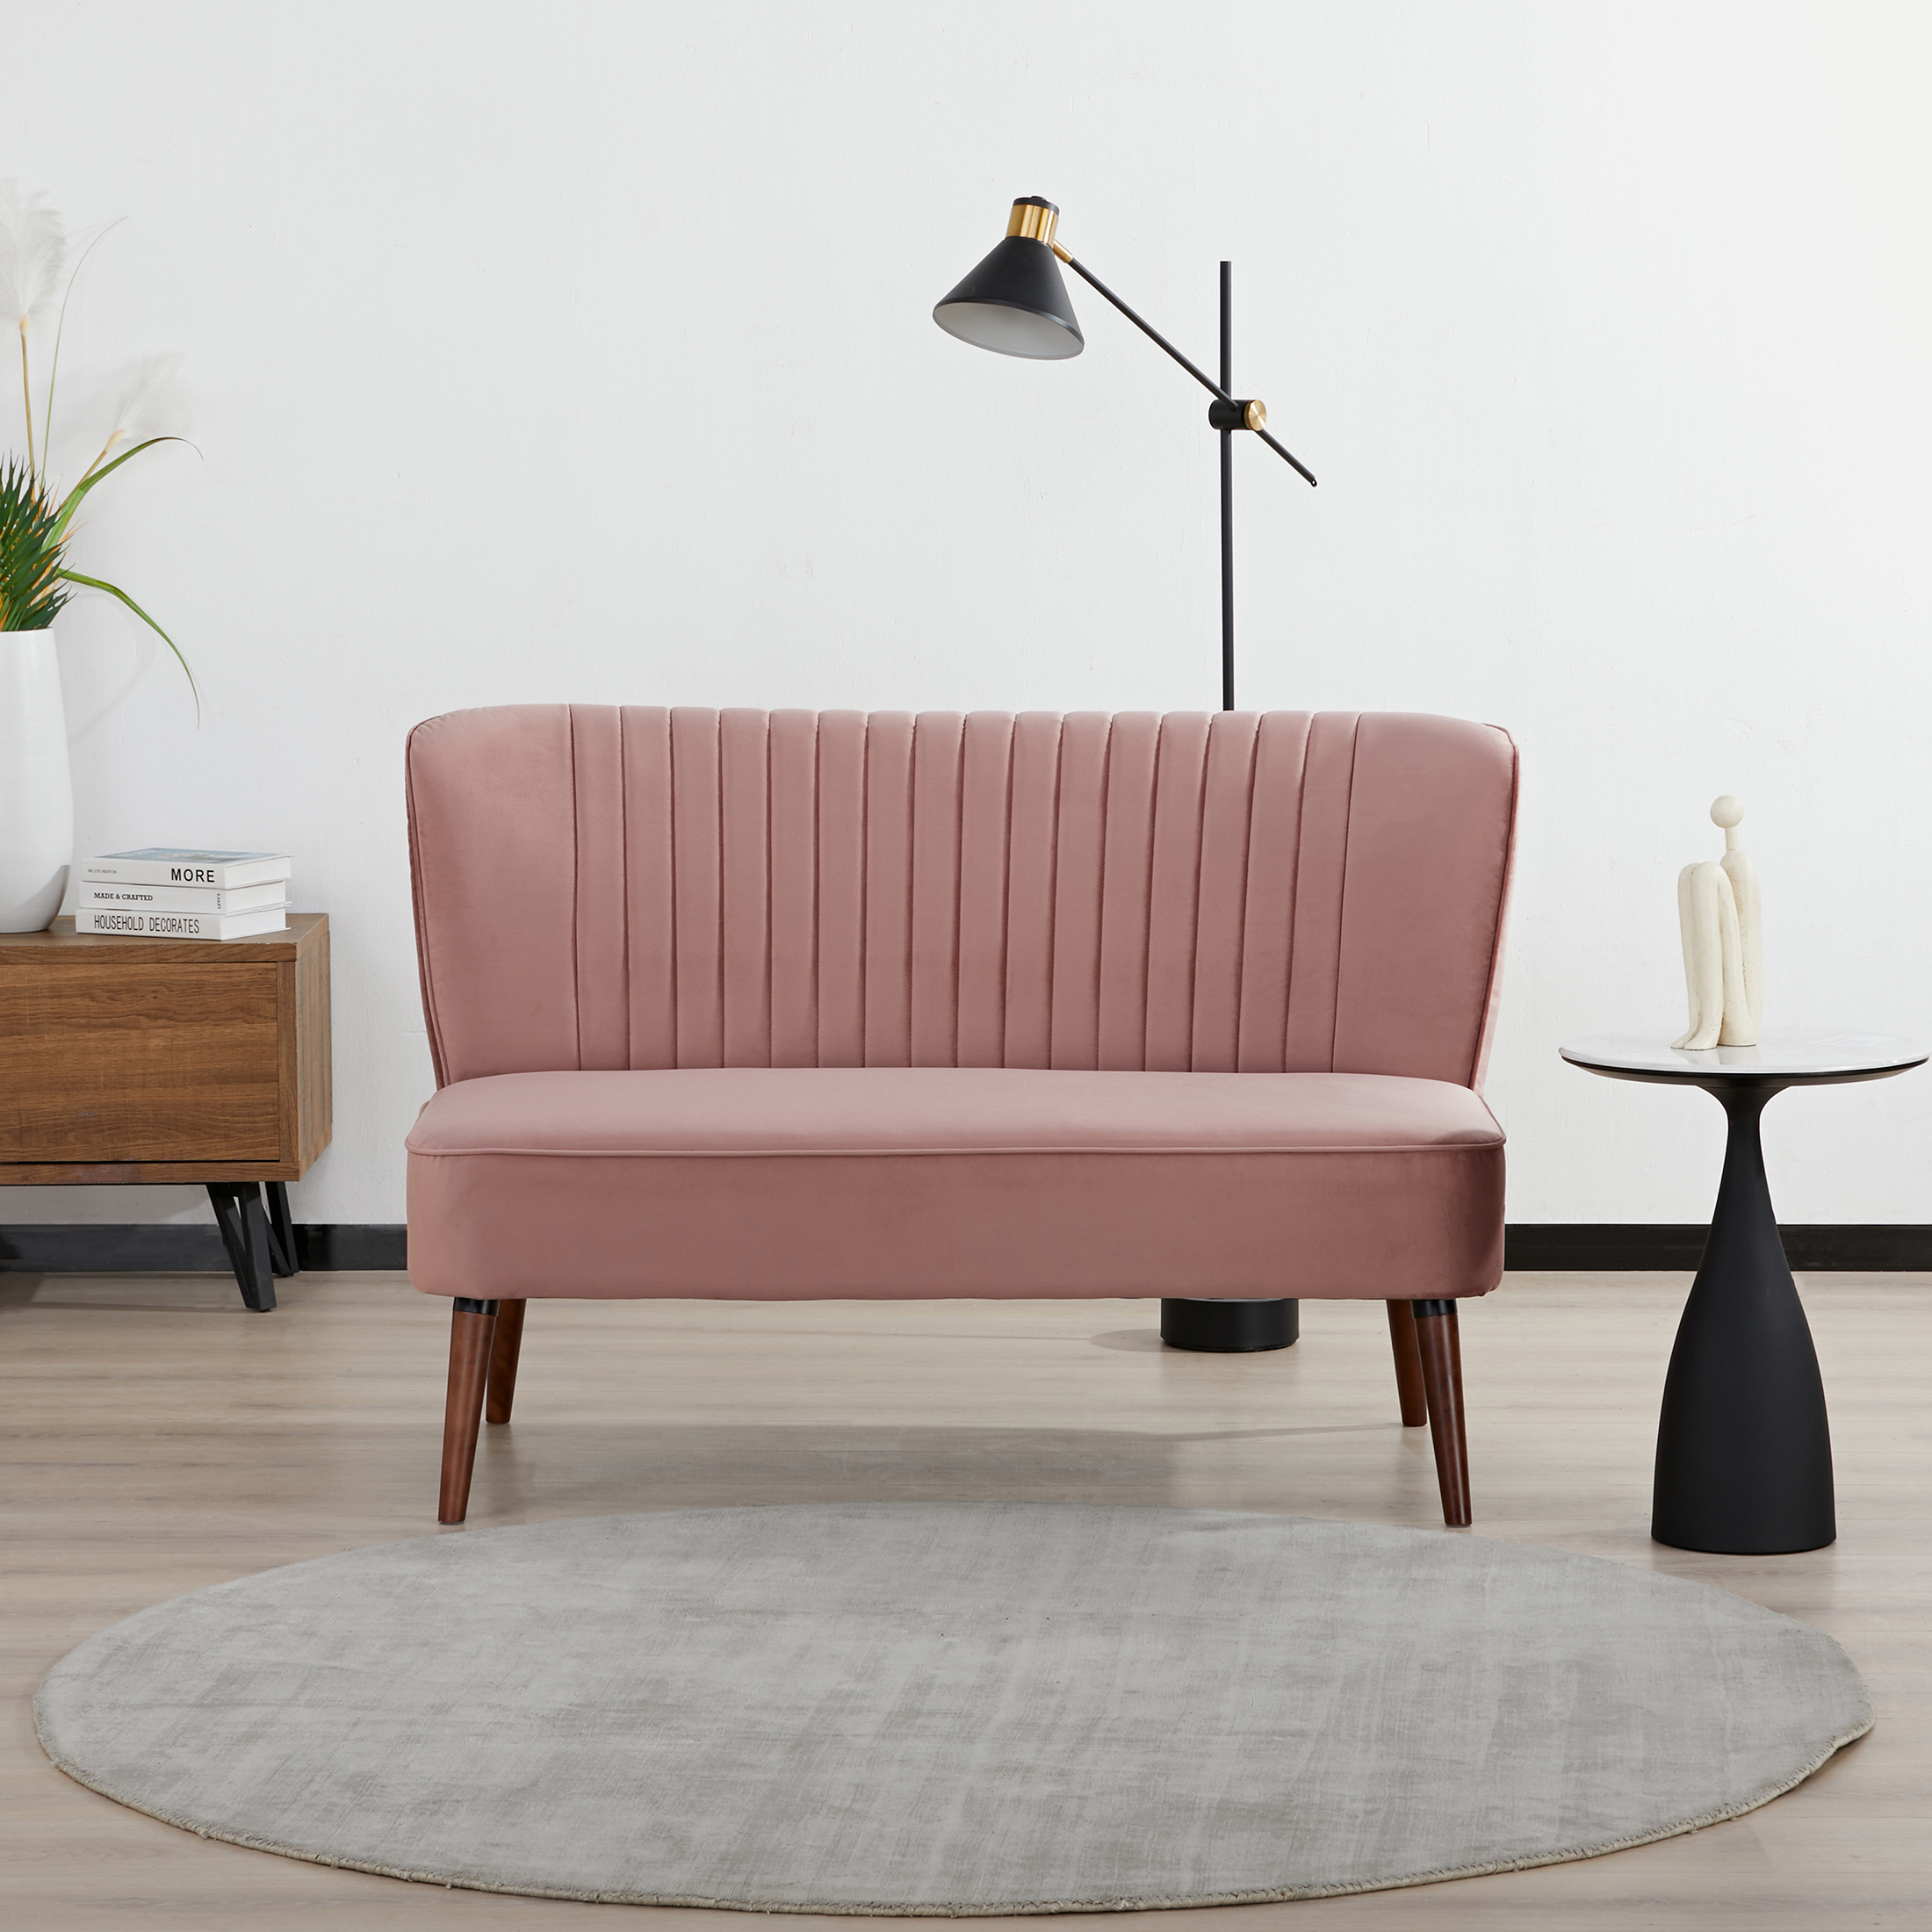 A&D Home Hollywood Mid-century Modern Velvet Tufted Loveseat, Compact 2 person Settee, Pink - image 3 of 9